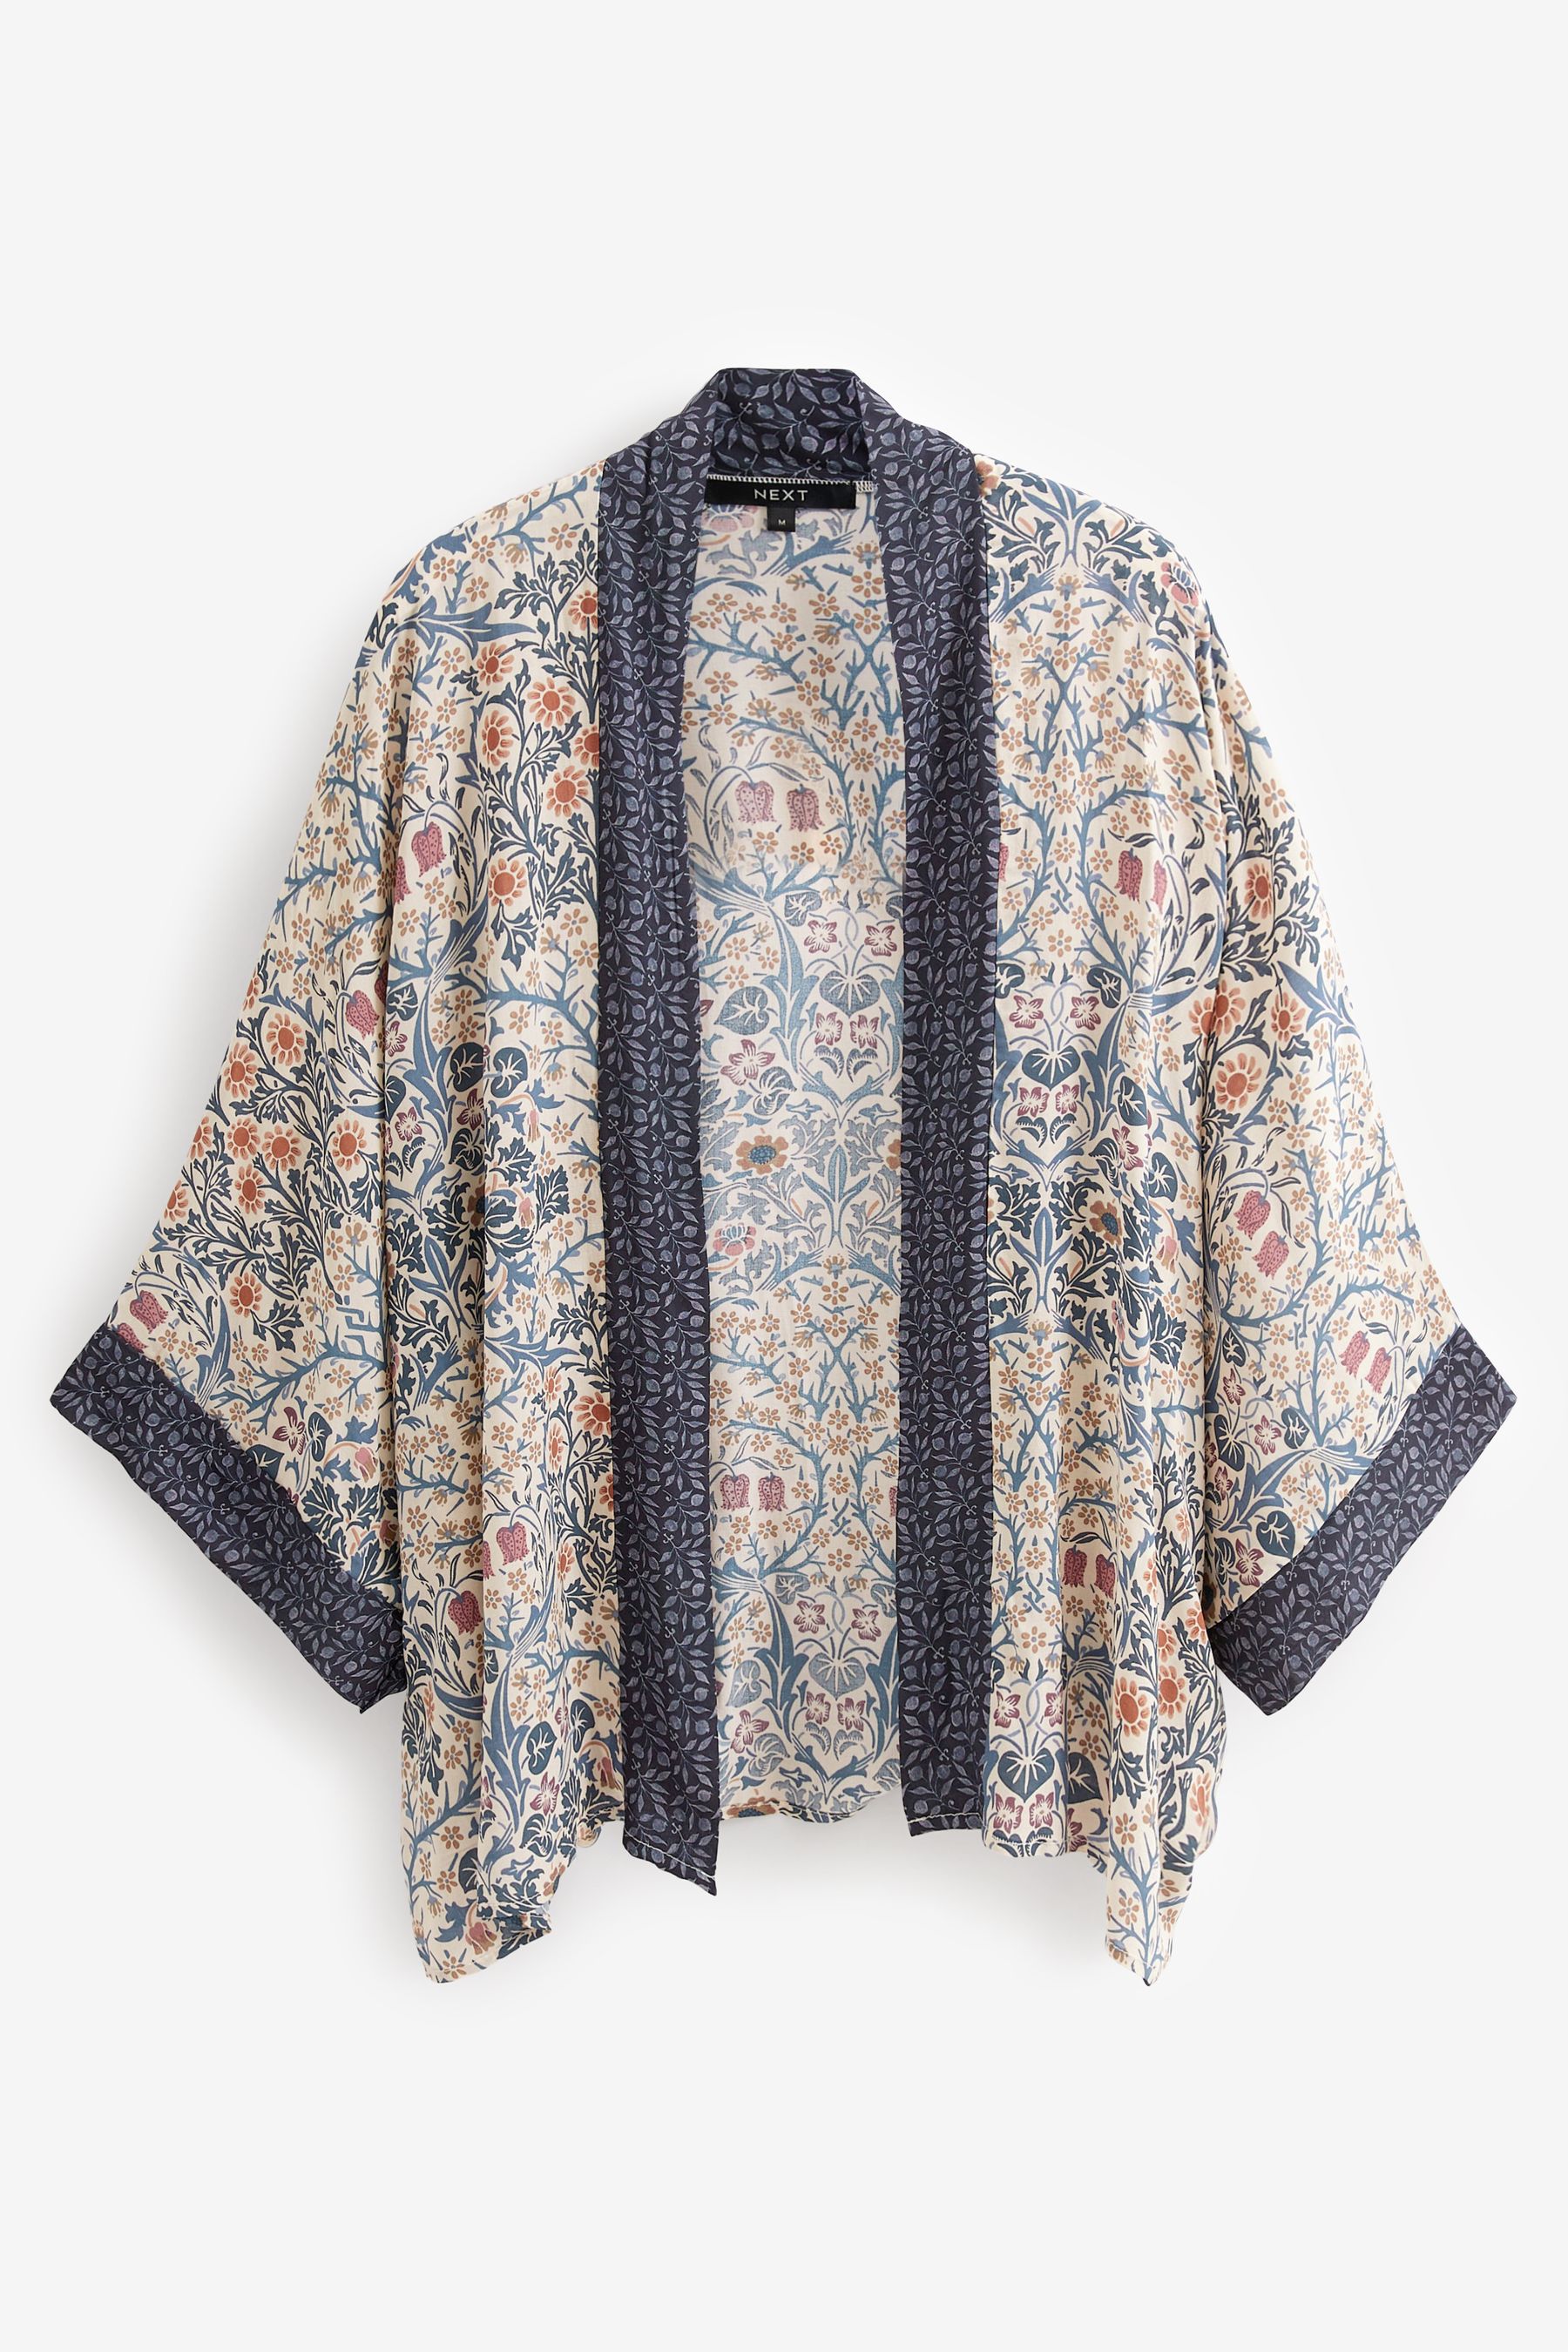 Buy Morris & Co. Blackthorn Navy Oatmeal Floral Kimono from the Next UK ...